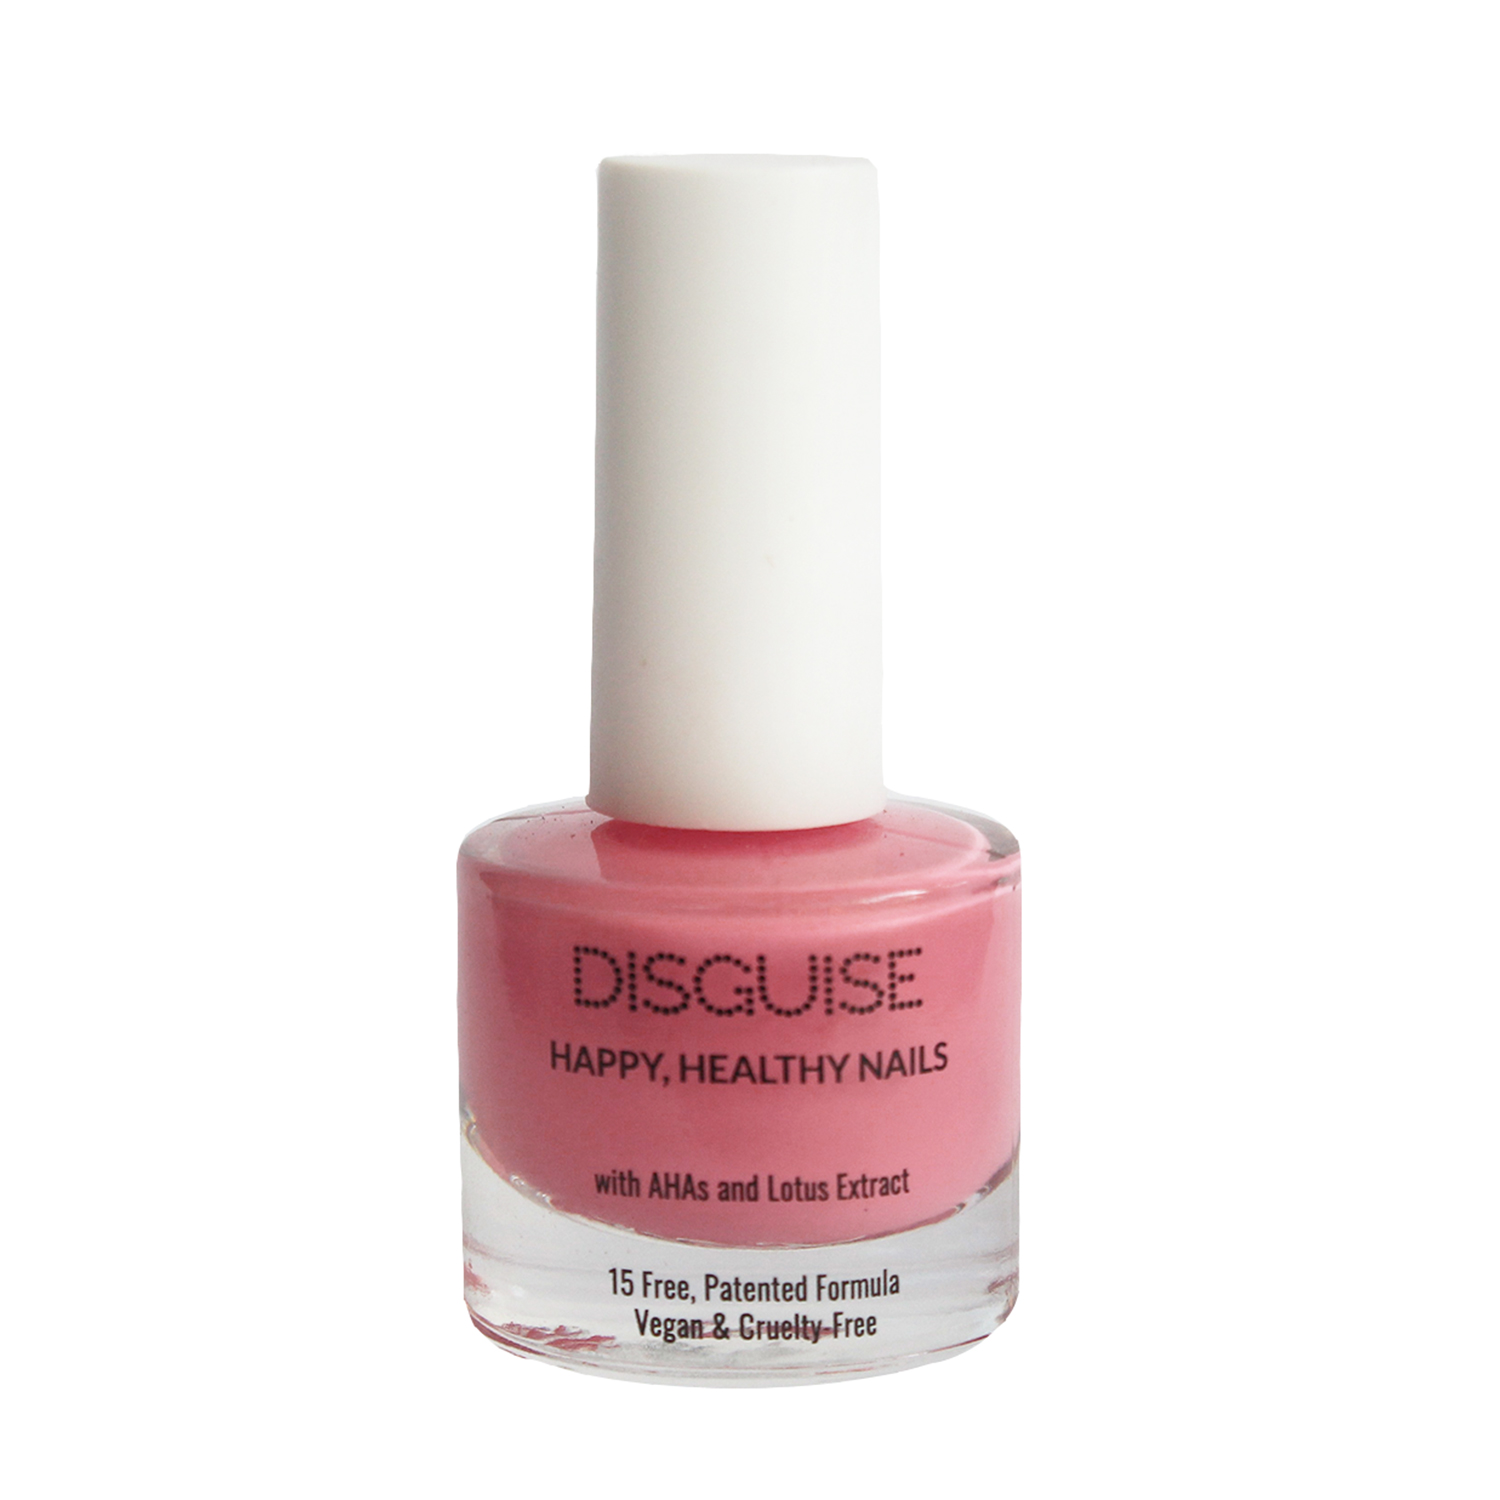 Disguise Cosmetics Happy, Healthy Nails, 9ml-112 Cotton Candy